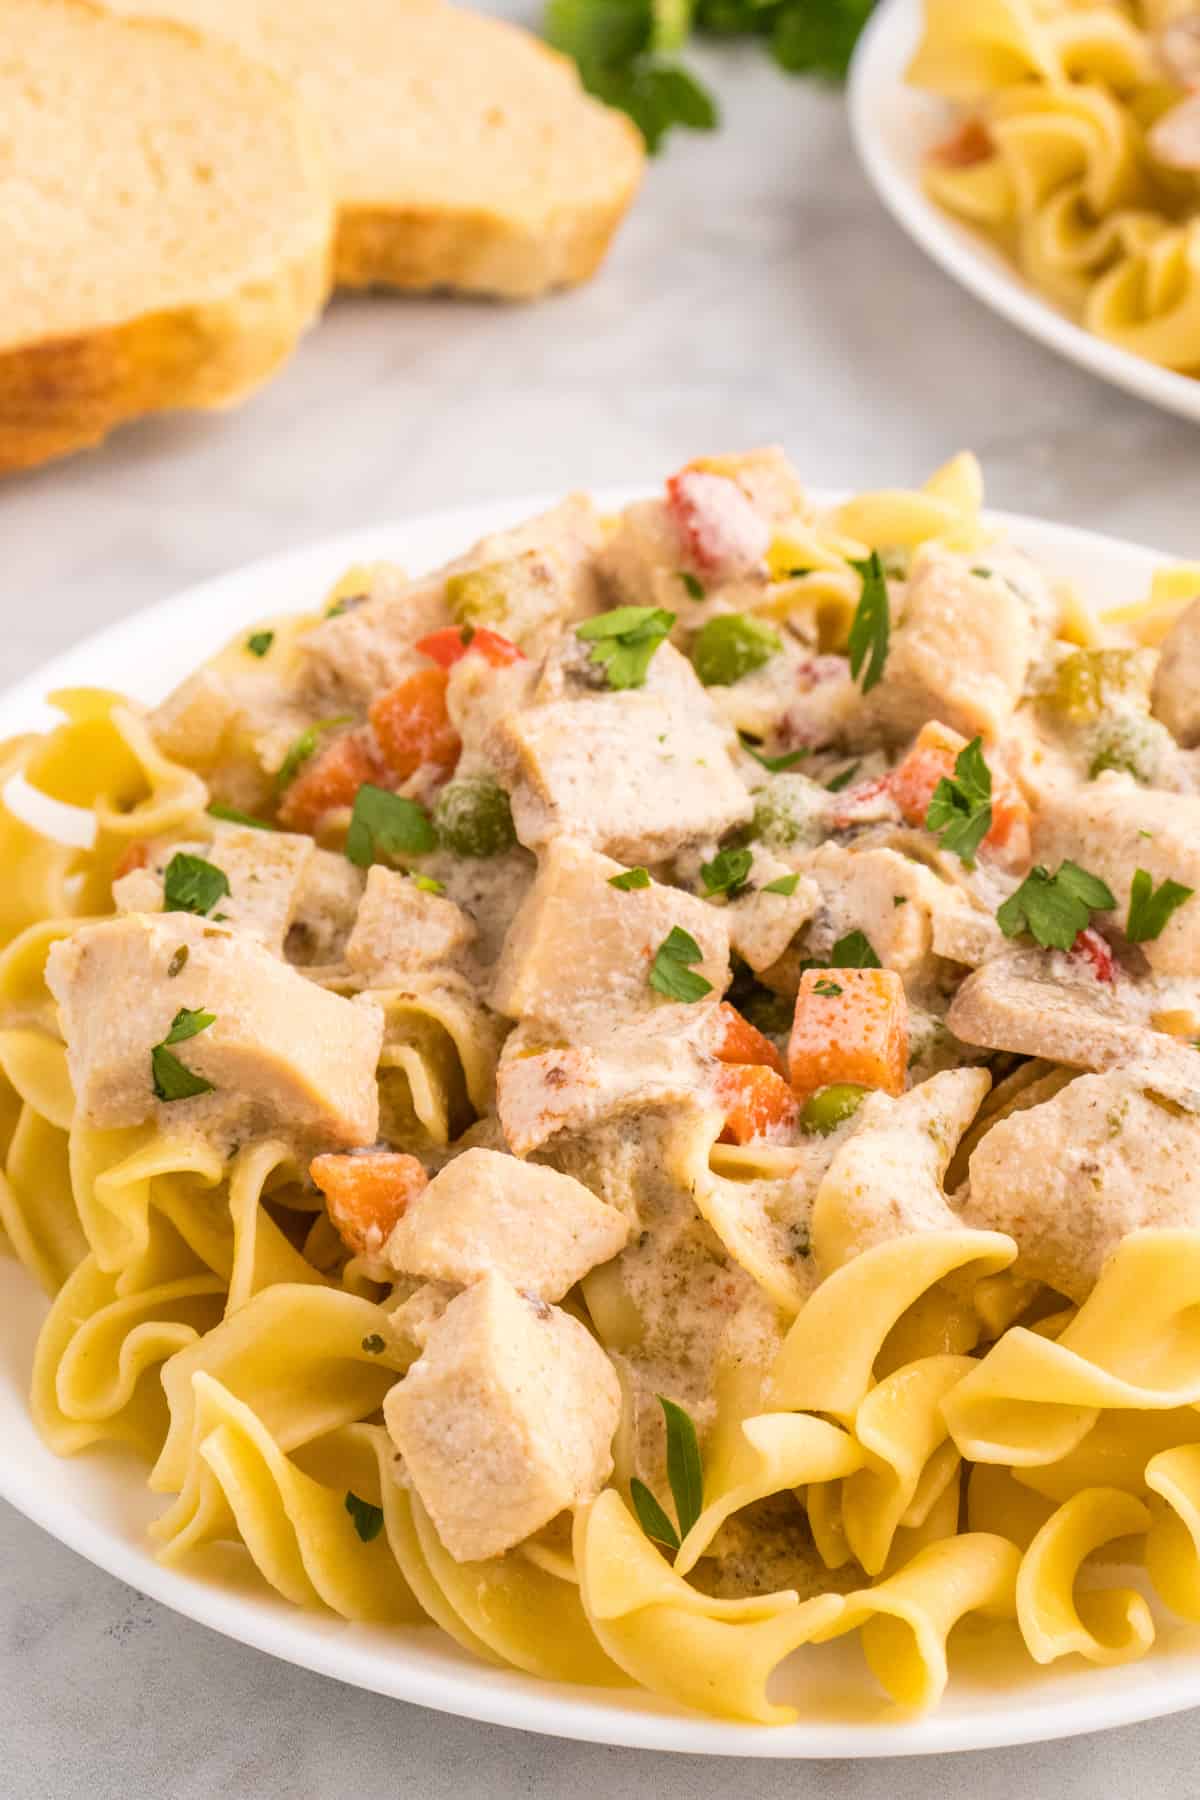 A slow cooker chicken a la king with vegetables served over a plate of pasta.